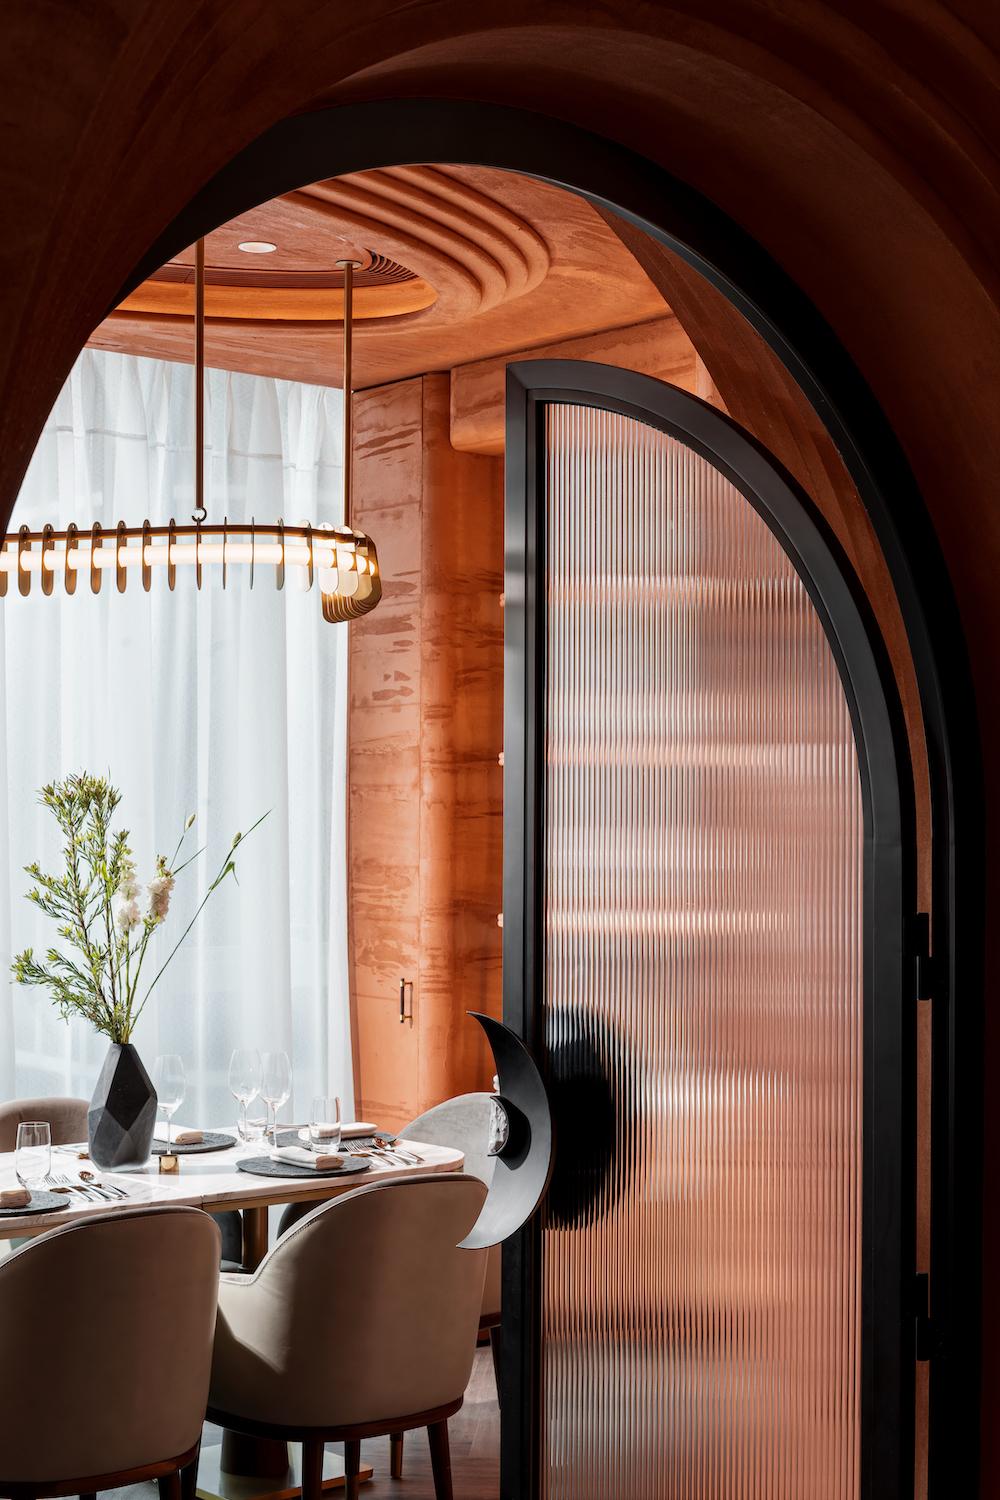 USA's Canyons Inspire the Design of this Hong Kong Restaurant: Central's 1111 ONES